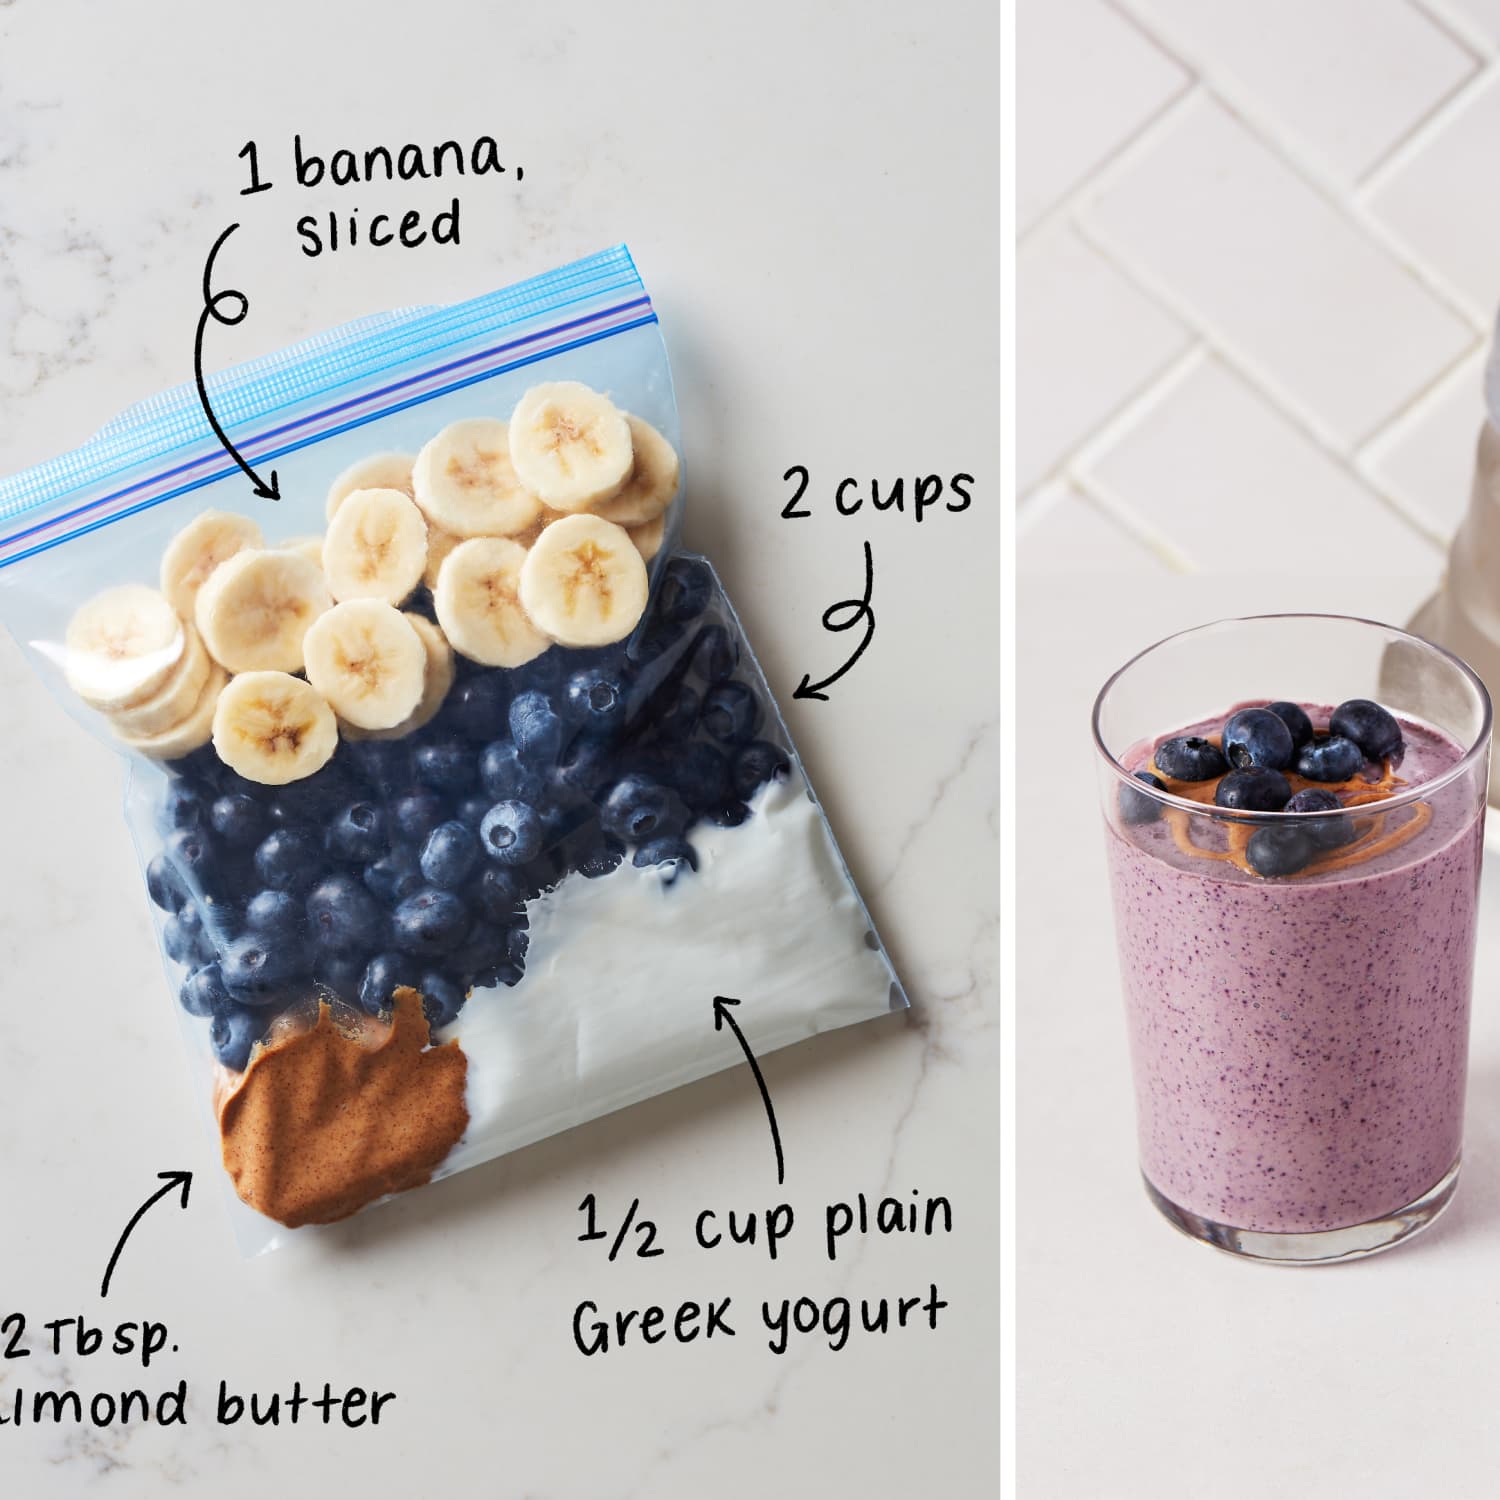 Make Ahead Smoothies (and How to Store Them)